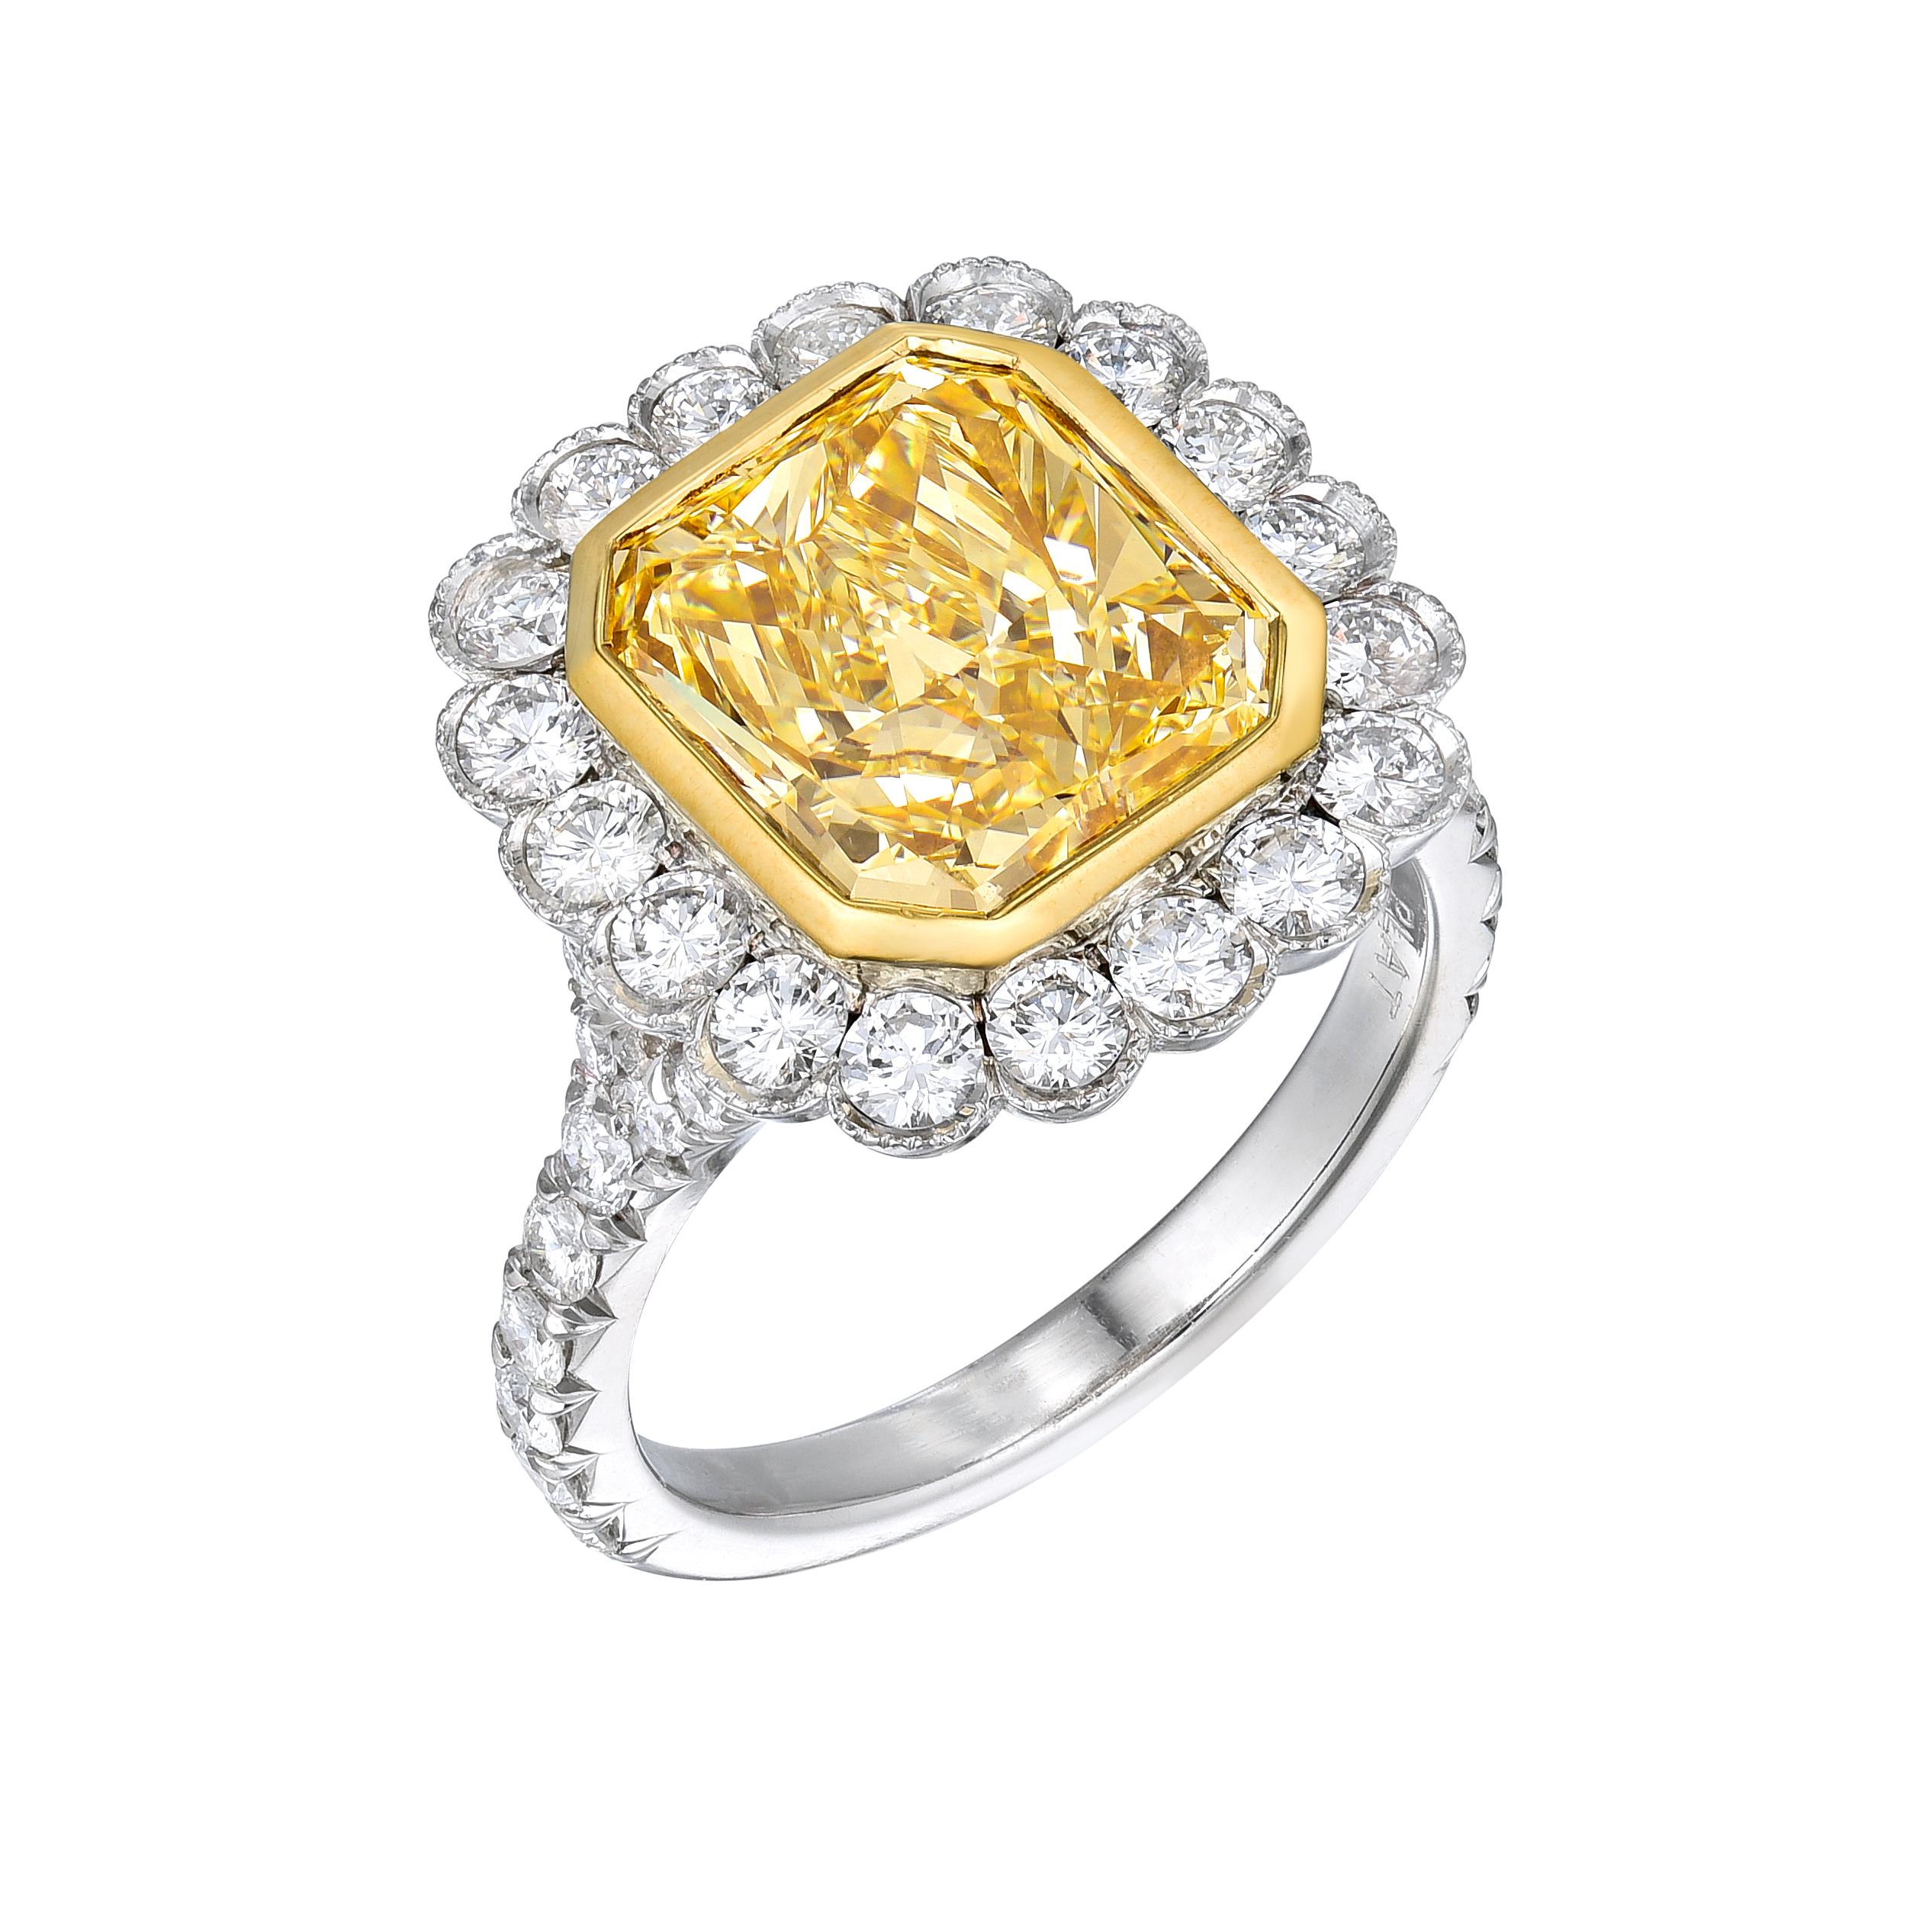 Diamond Platinum ring with GIA certificate, no.1162532915. Center stone: 4.02ct Radiant cut Fancy Yellow diamond, 10.2 x 9.1 x 5.0 mm. Side stones: 1.00ct Brilliant Round diamonds: F-G VS1-SI1. Total carat weight: 5.02ct. EGL Report no.400148818D